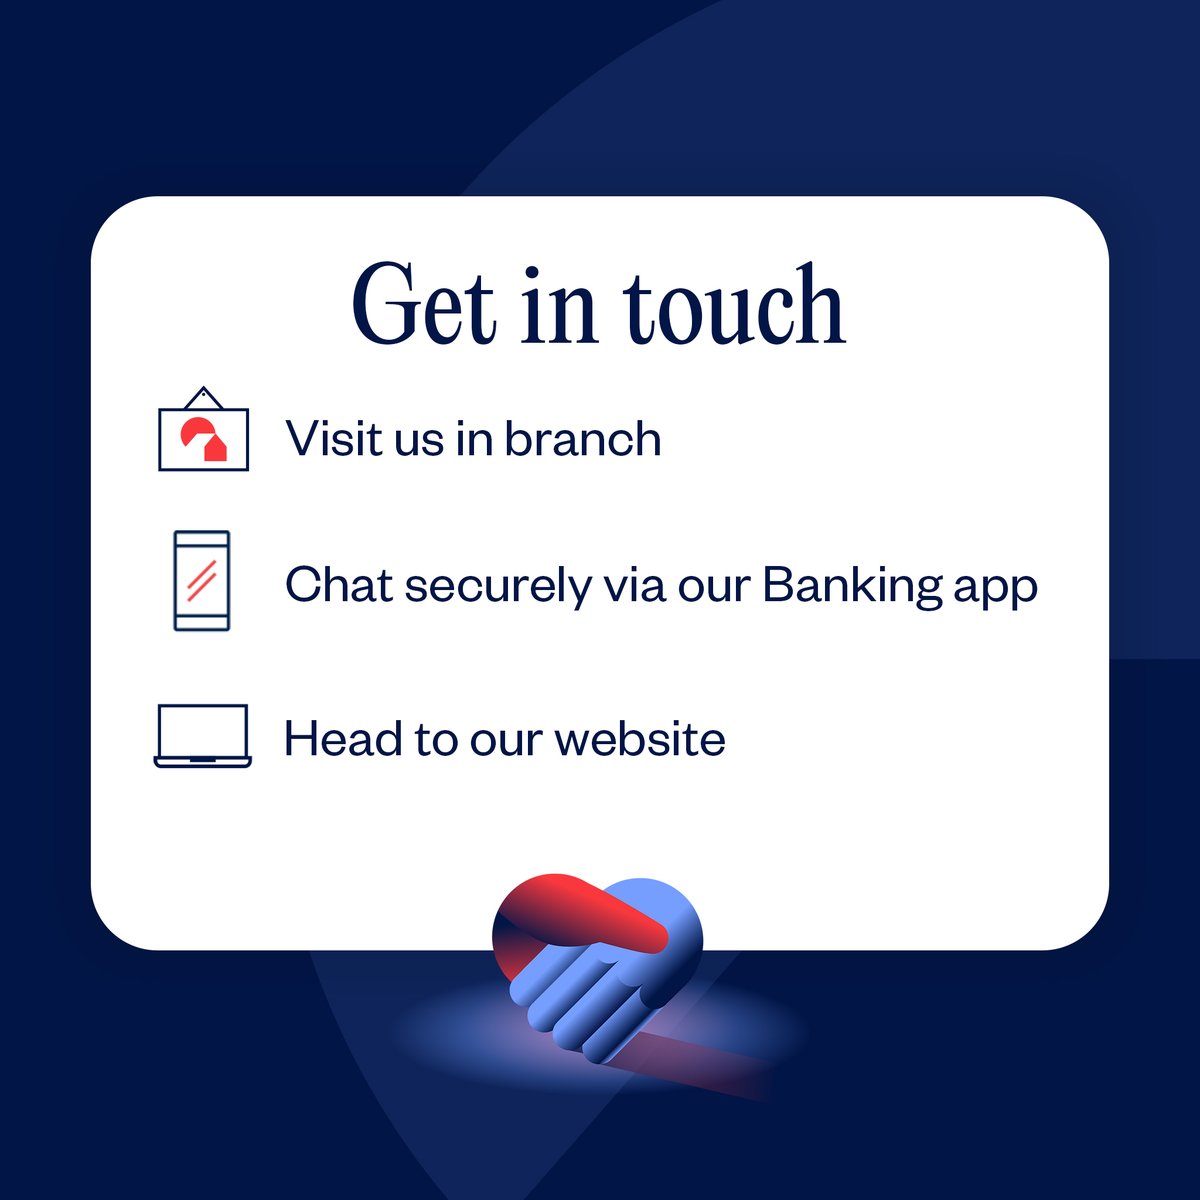 Whether you want to speak to a real person in branch, or do your banking online, there are many ways you can bank with us. If you need support, get in touch: spr.ly/6013XPQIV